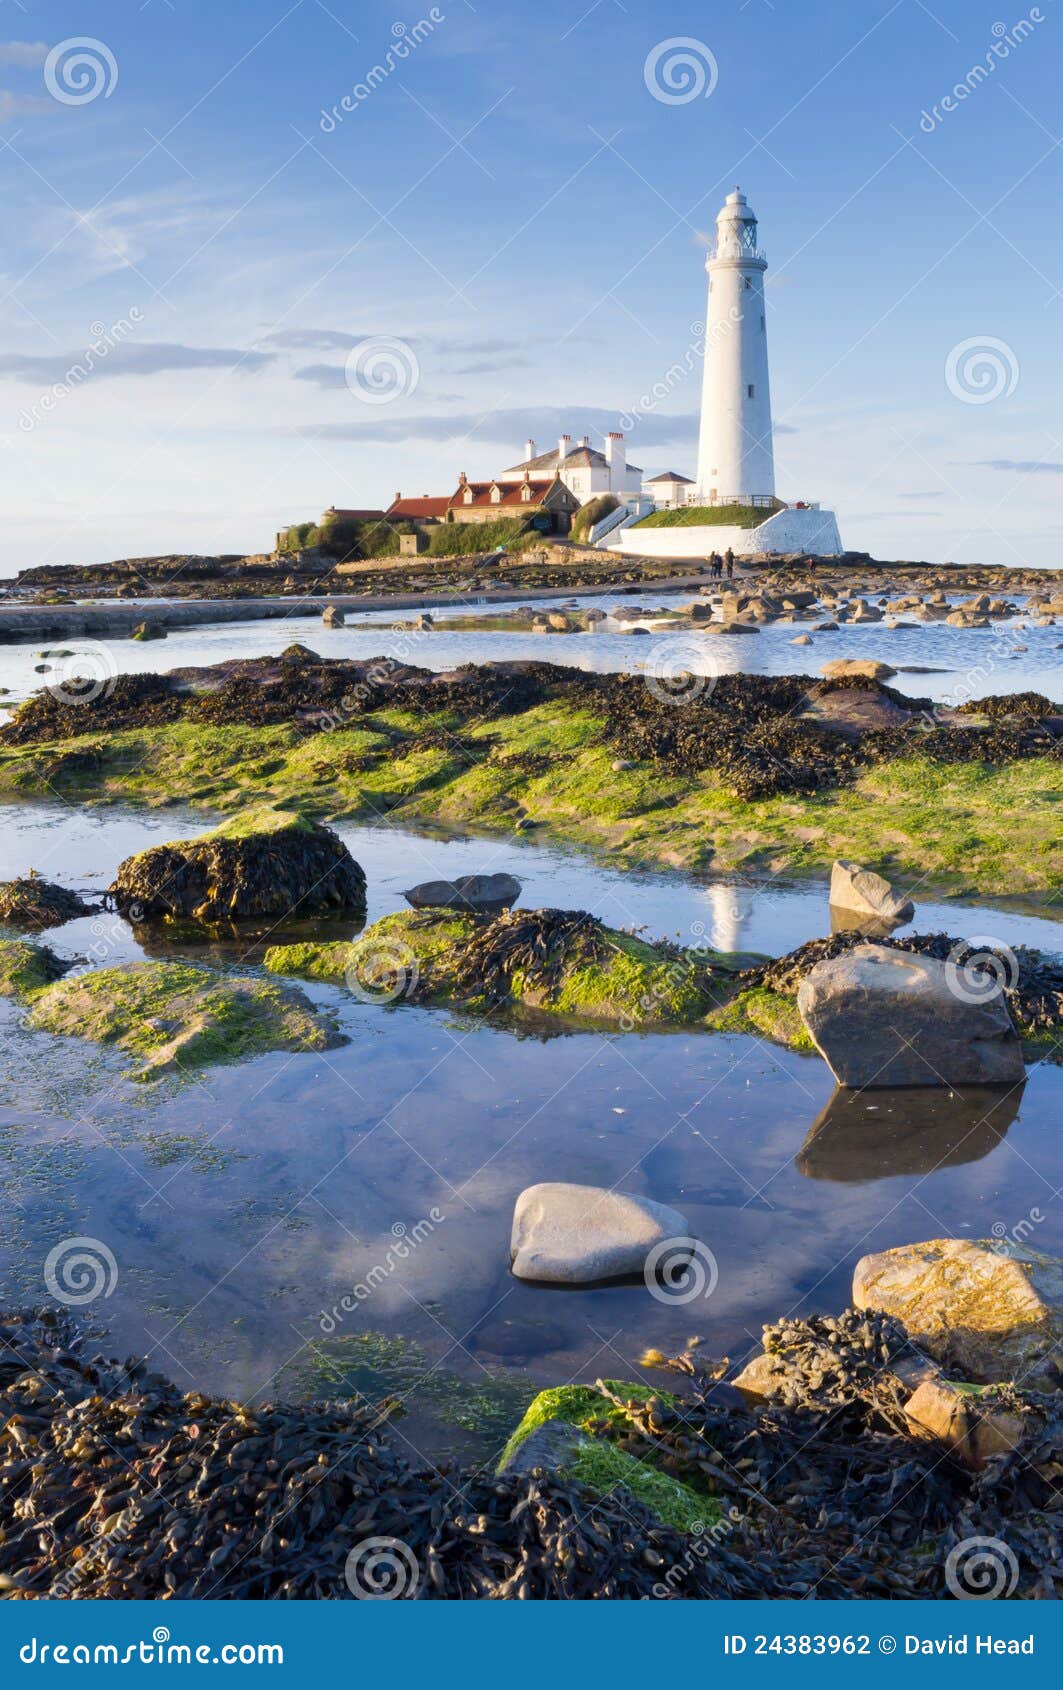 st marys lighthouse at low tide